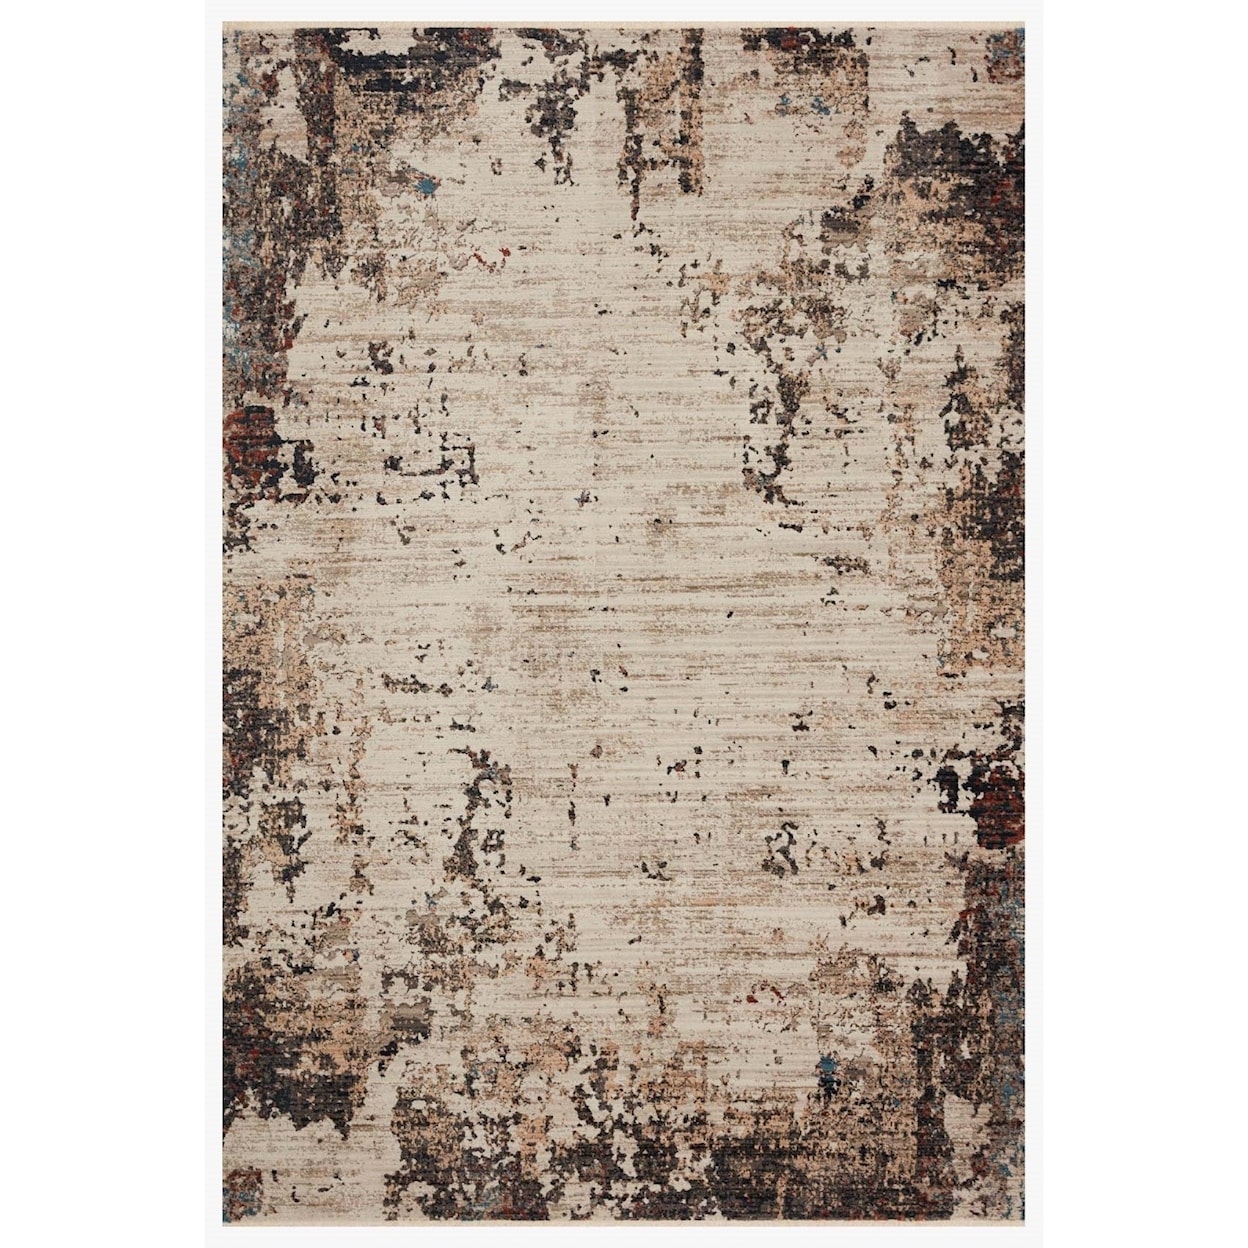 Reeds Rugs Leigh 5'3" x 7'6" Ivory / Charcoal Rug